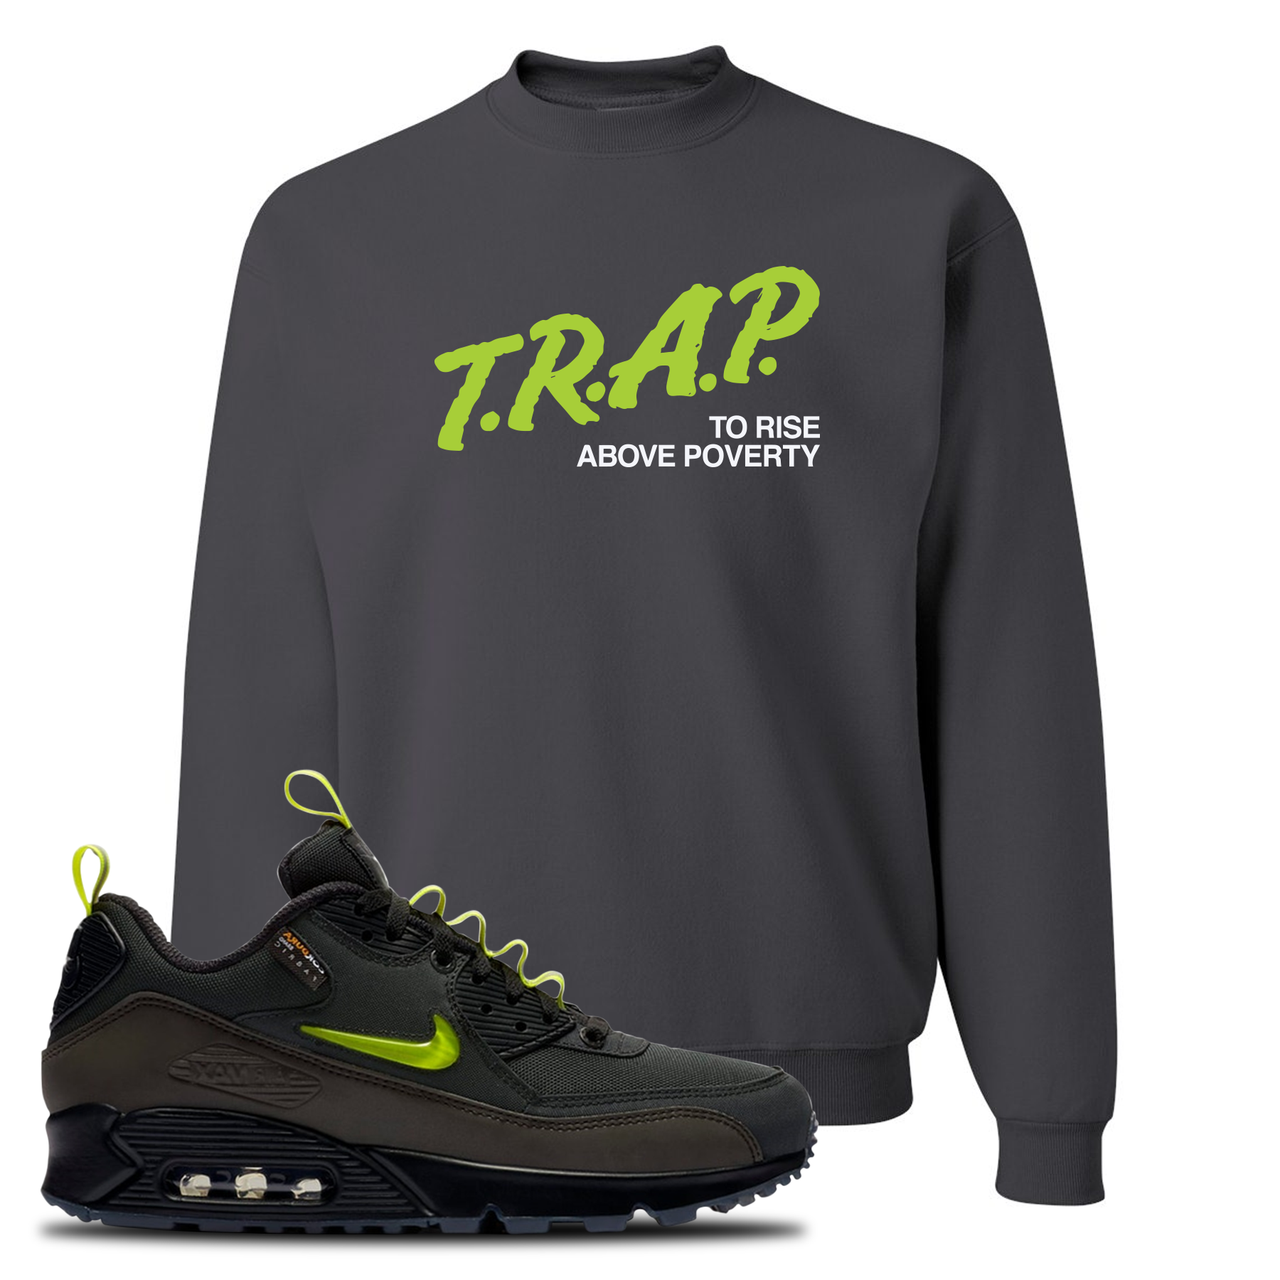 The Basement X Air Max 90 Manchester Trap to Rise Above Poverty Charcoal Gray Sneaker Hook Up Crewneck Sweatshirt